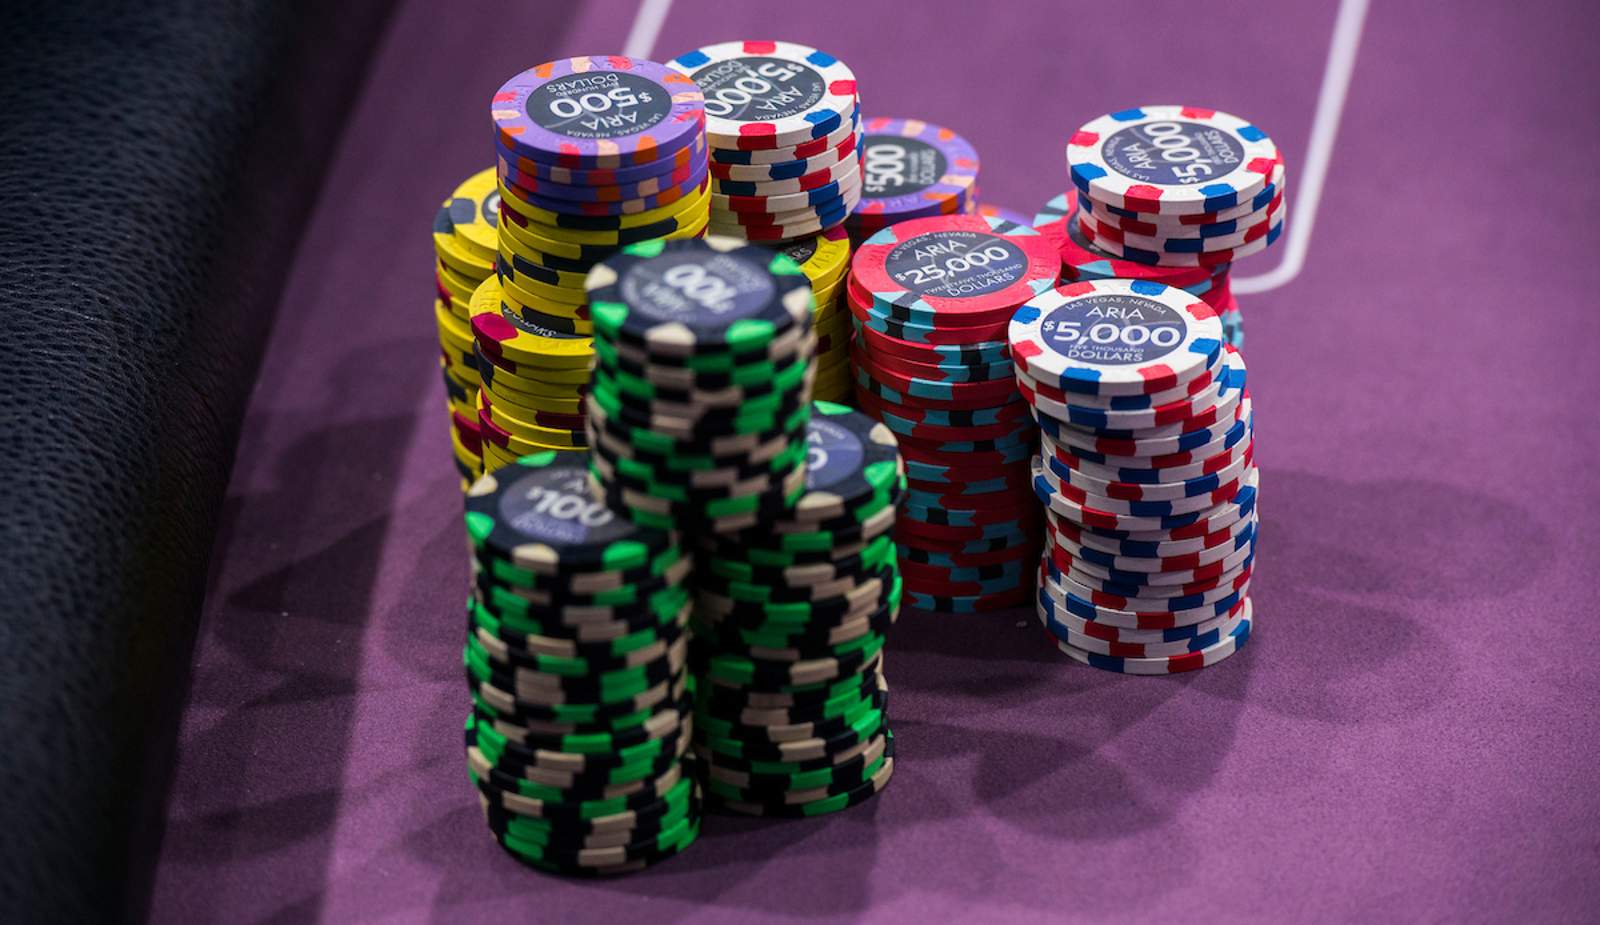 Don't Look Now: Dwan, Massive Pots, Molly and More